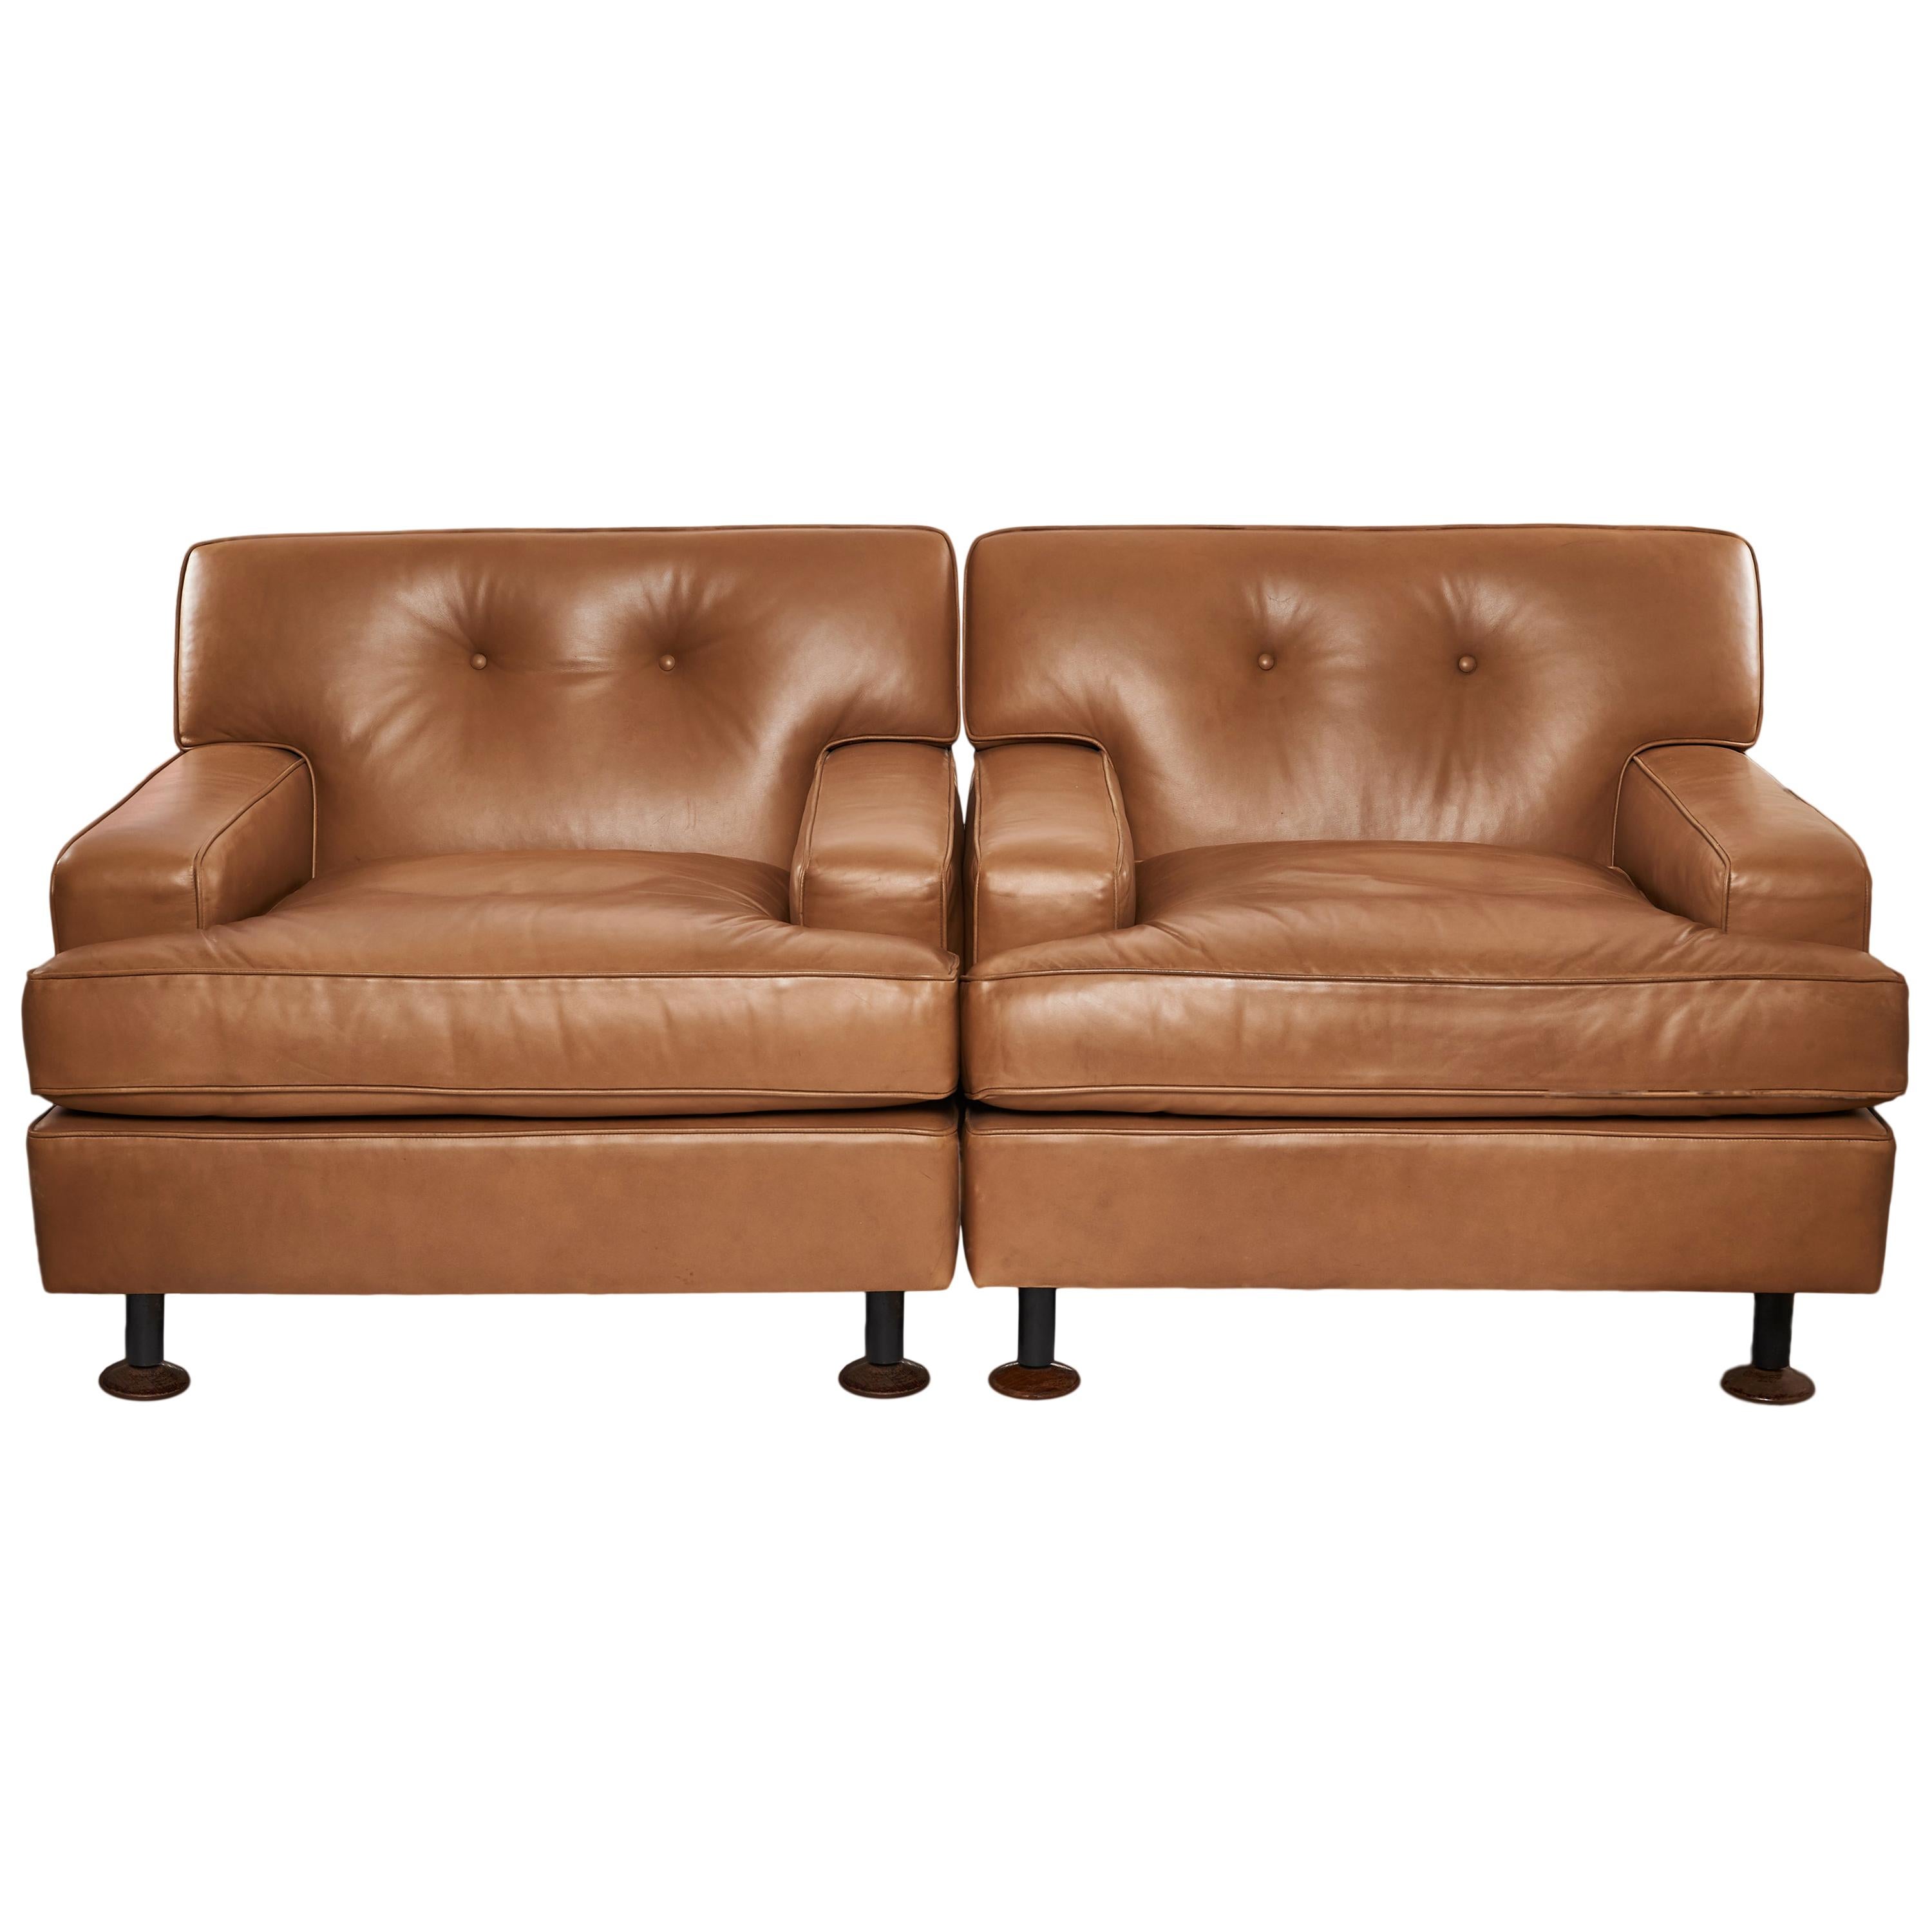 Pair of Marco Zanuso "Square" Brown Leather Lounge Chairs, Italy, 1962